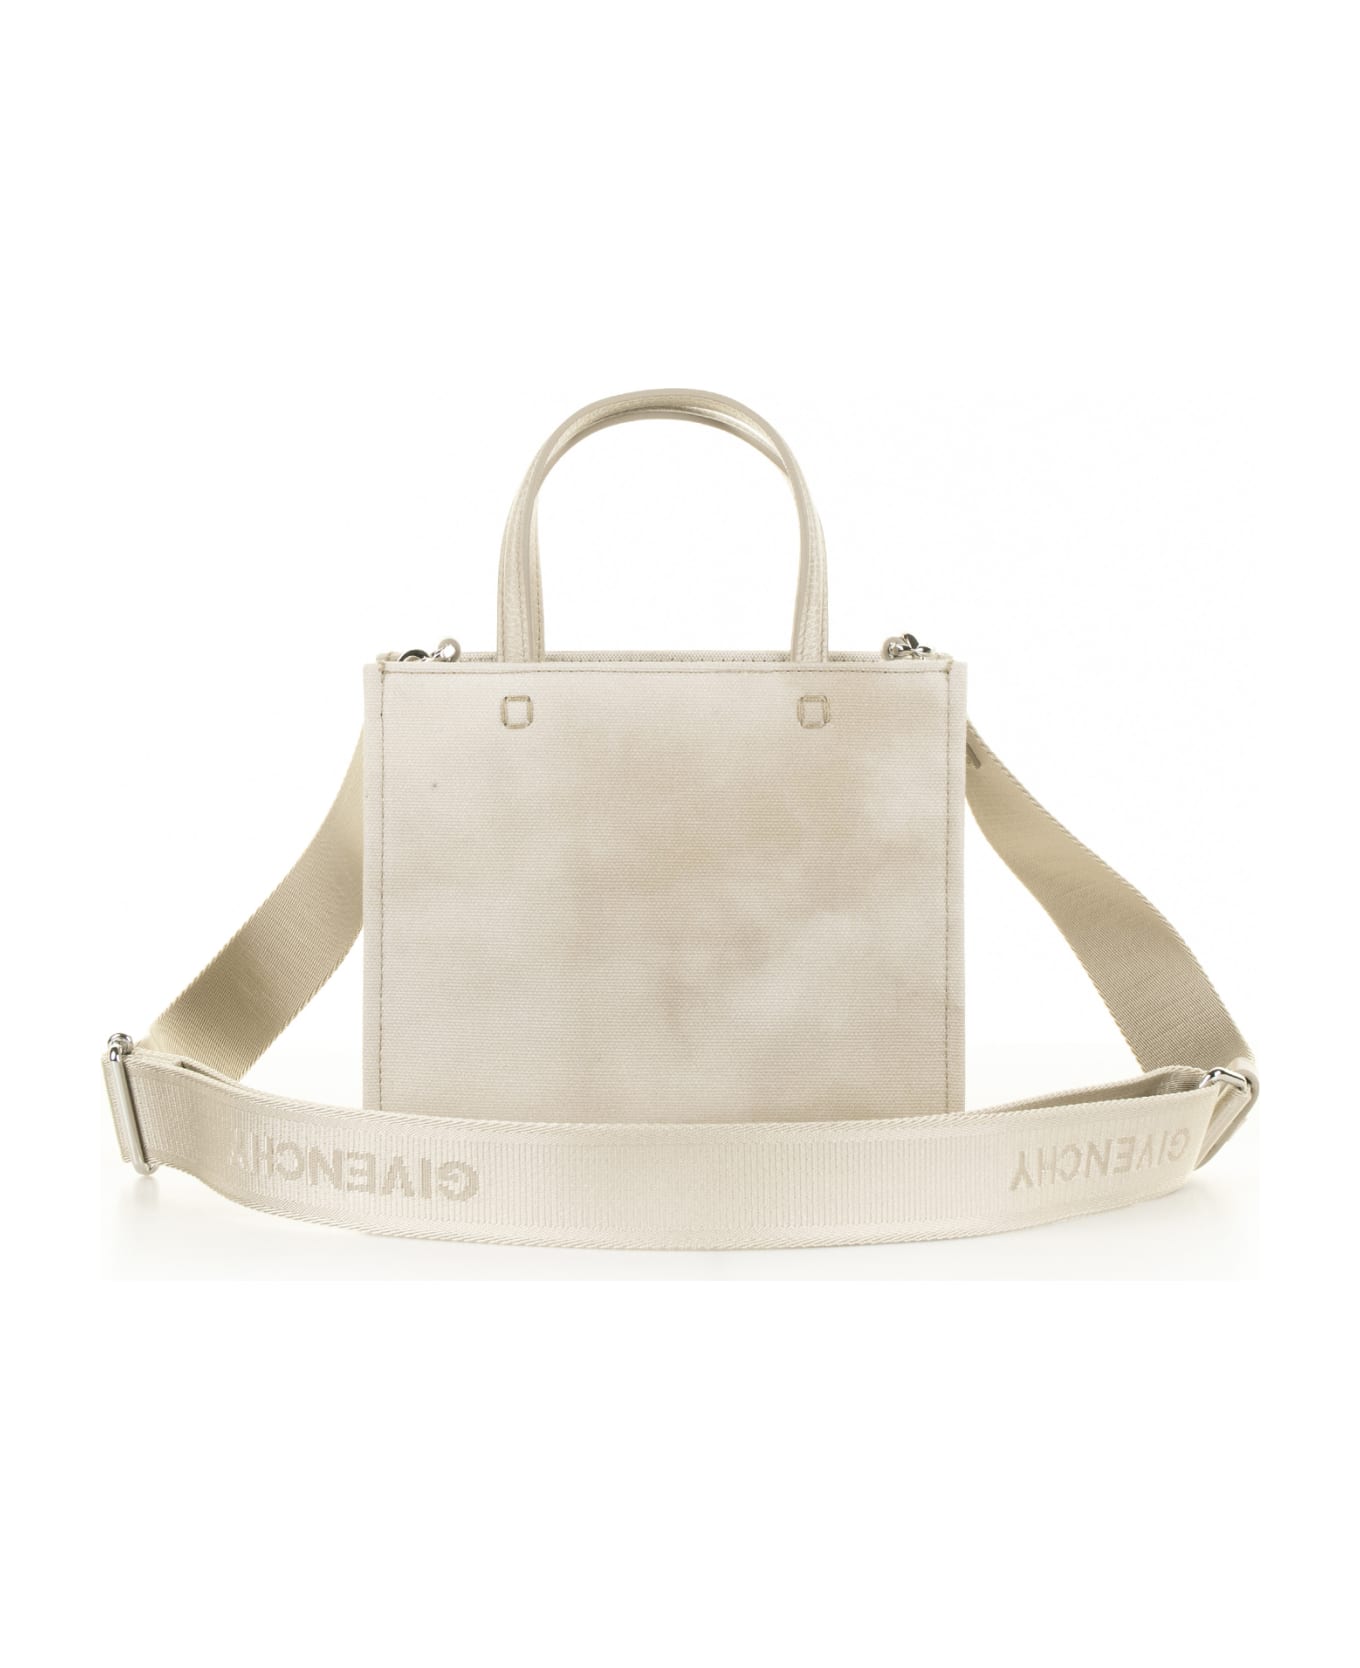 Givenchy Tote Bag In Canvas - dusty gold